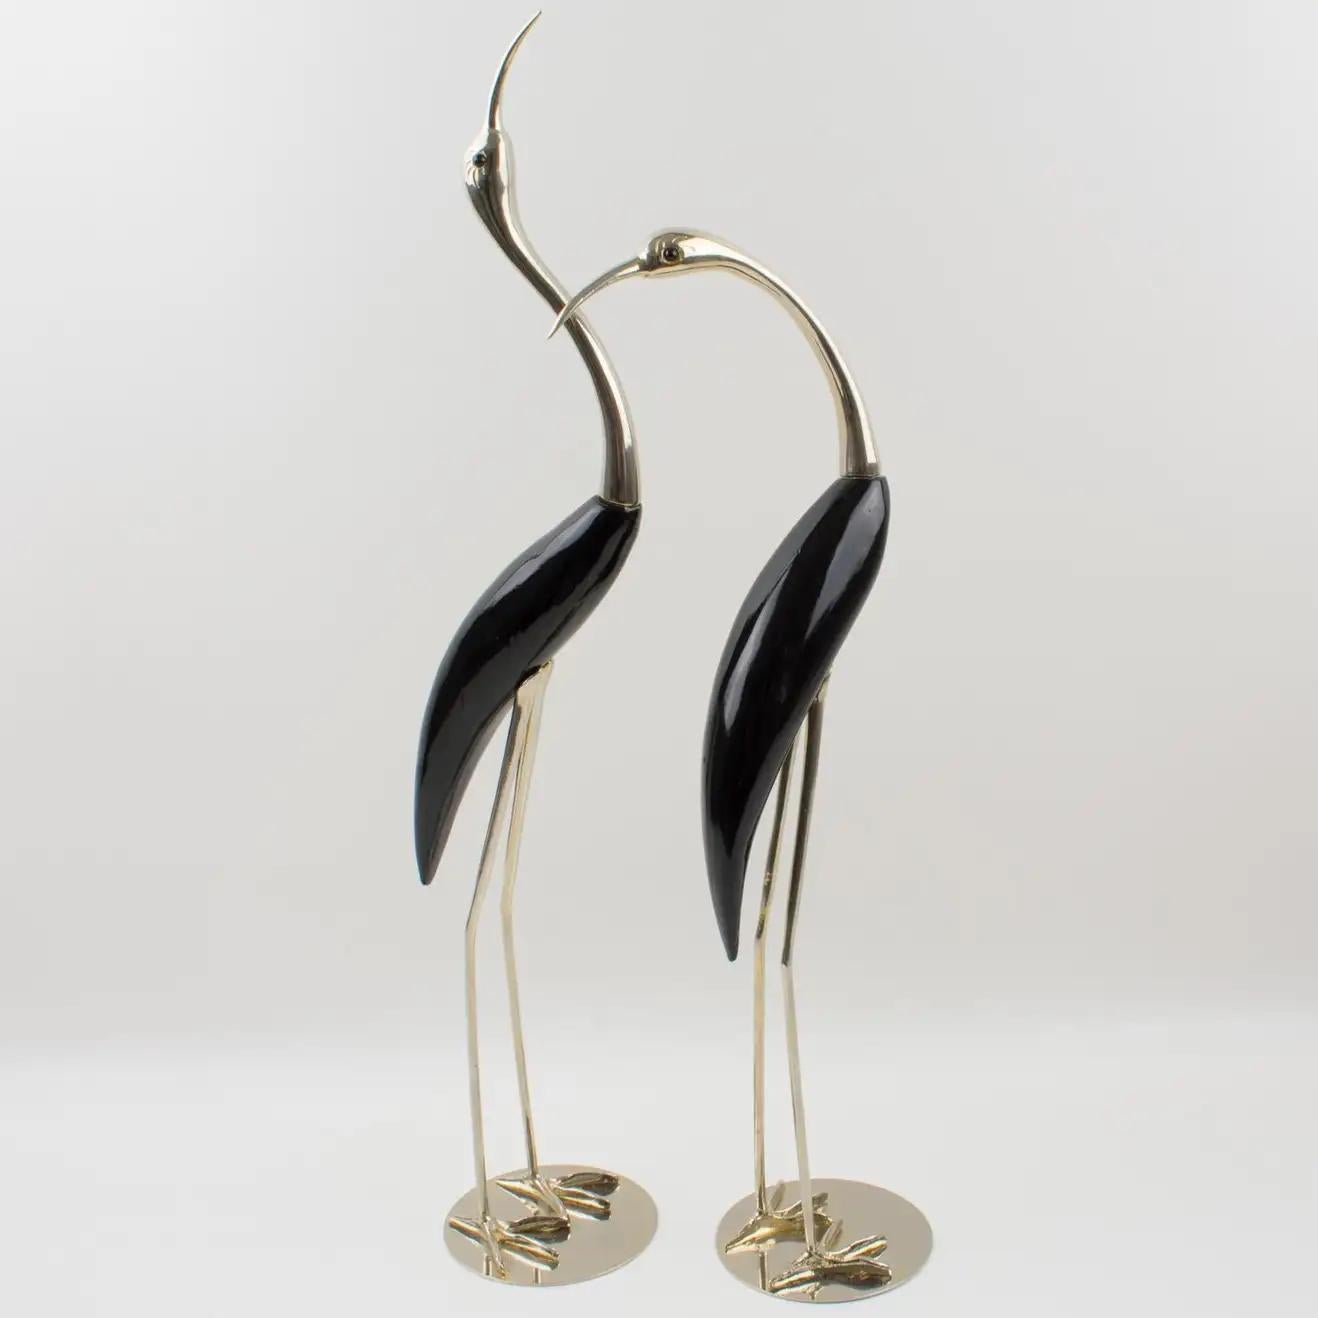 This beautiful pair of large birds, egret or wader, was designed and manufactured by Italian company De Stijl in Firenze in the 1970s. Each bird is carefully hand-crafted with silvered metal and glossy polished black lacquered carved wood. Each bird